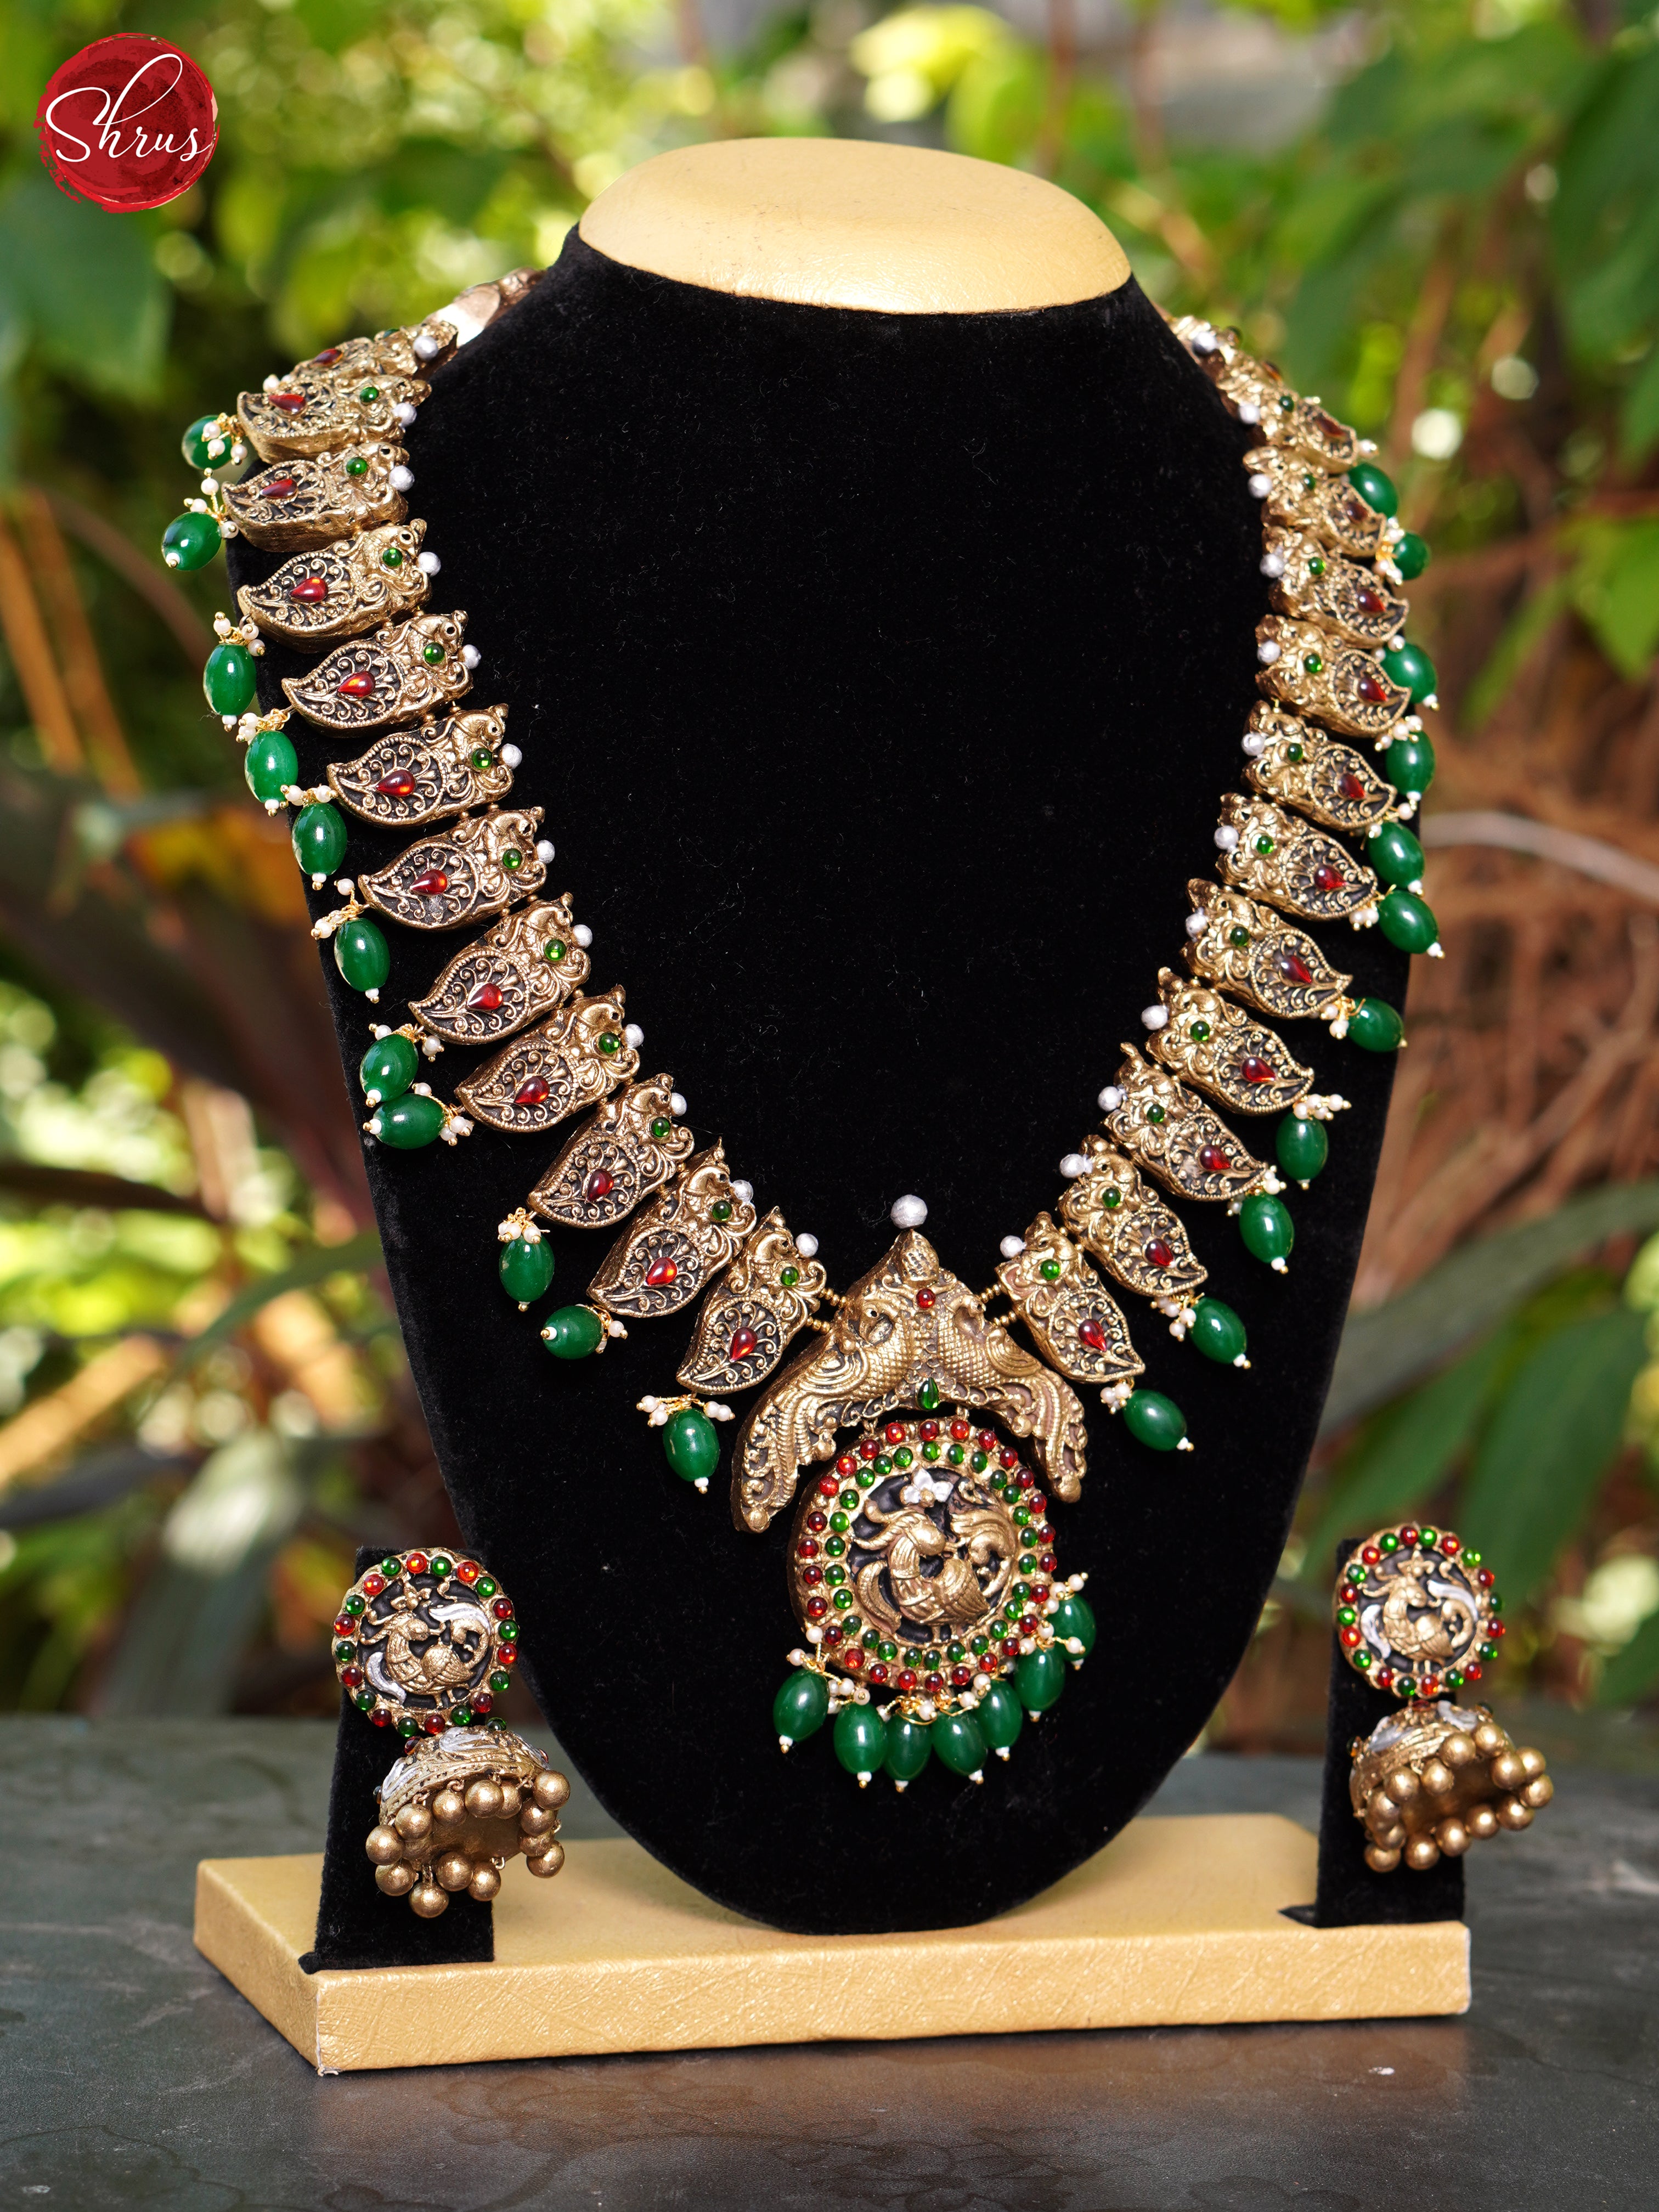 Handmade Peacock Terracotta necklace with Jhumkas - Accessories - Shop on ShrusEternity.com